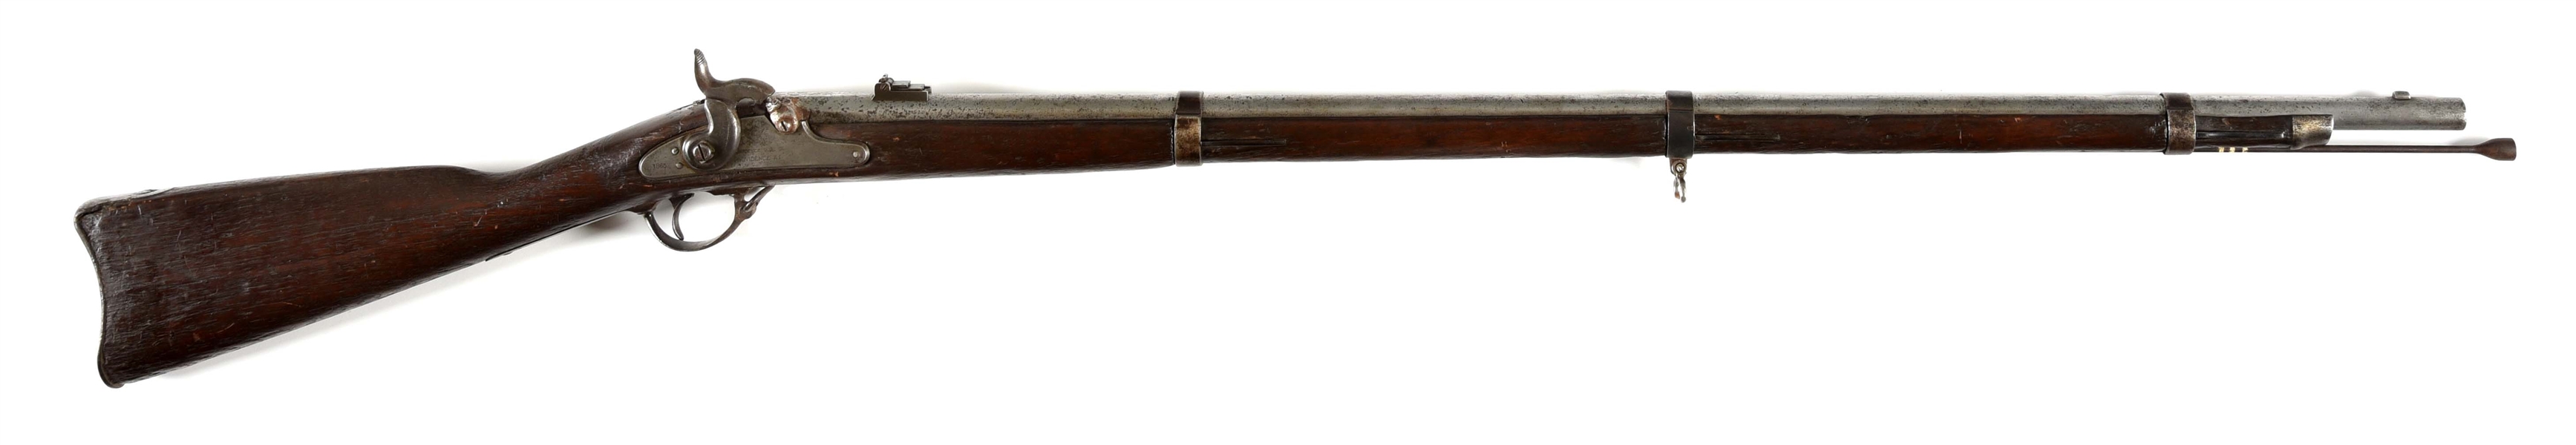 (A) PROVIDENCE TOOL CO. MODEL 1861 PERCUSSION RIFLE MUSKET.